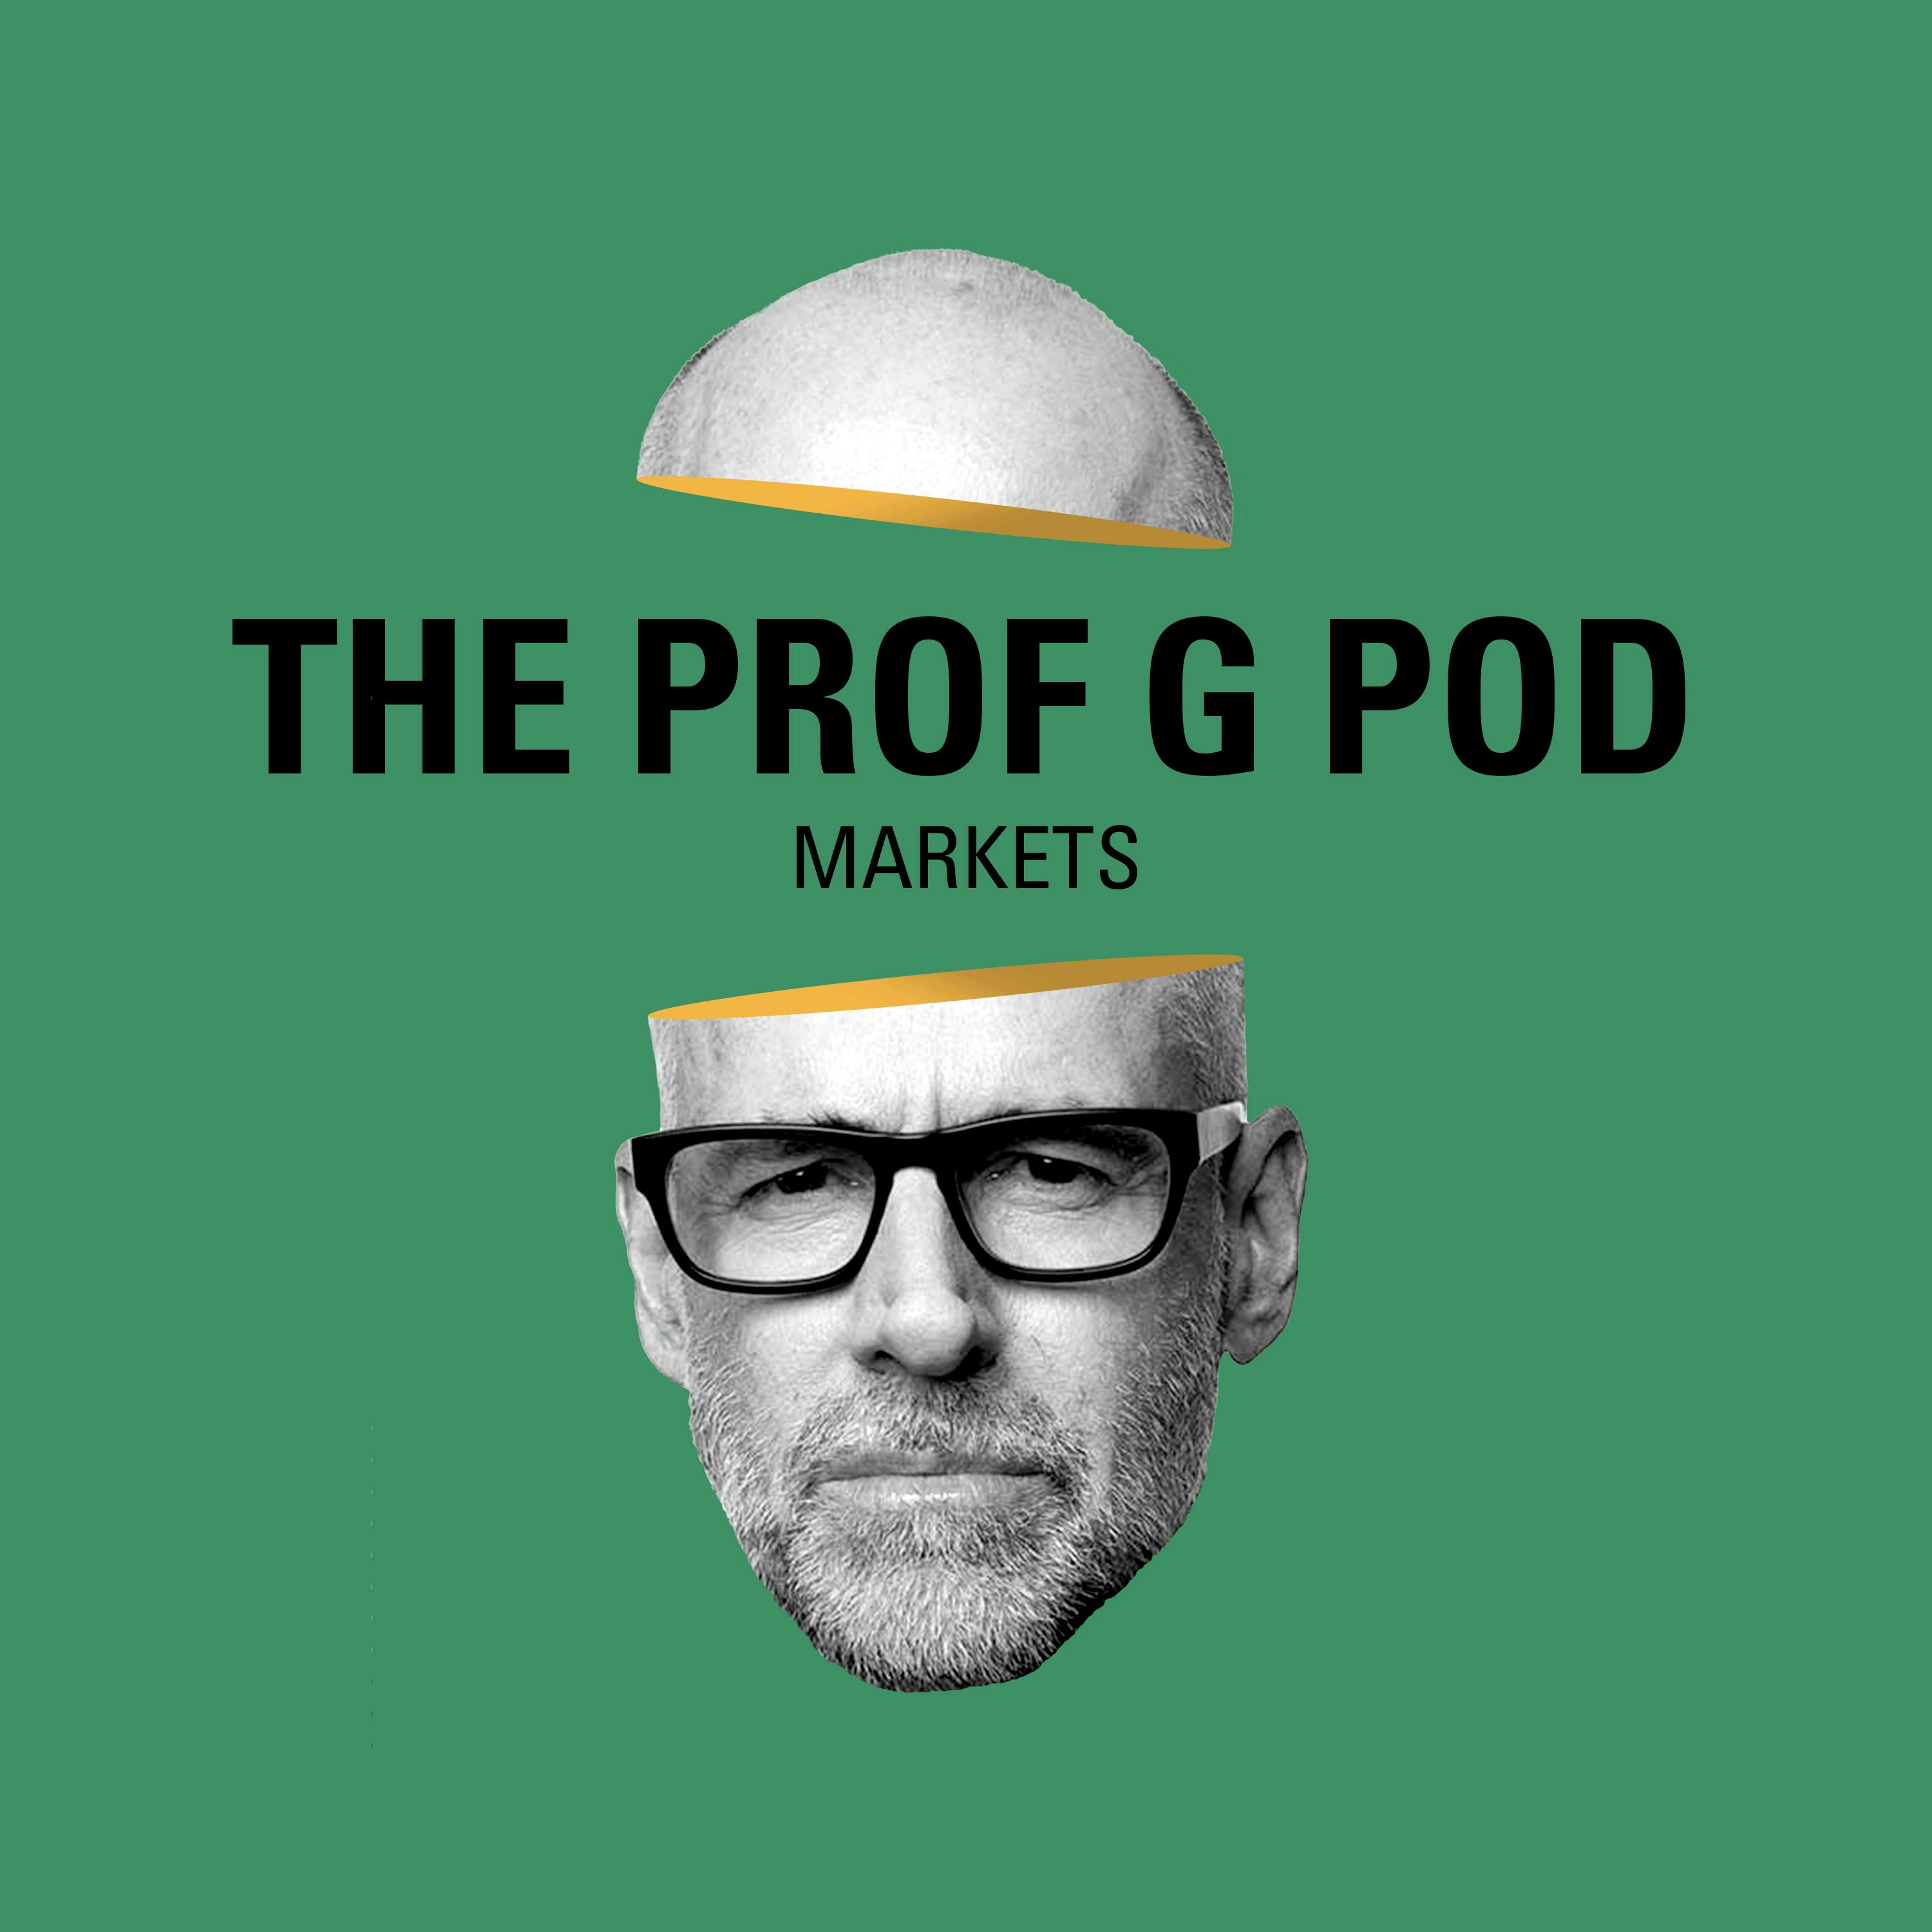 Prof G Markets: Tesla’s Terrible Earnings, the FTC’s Noncompete Ban, and 24/7 Trading at the NYSE